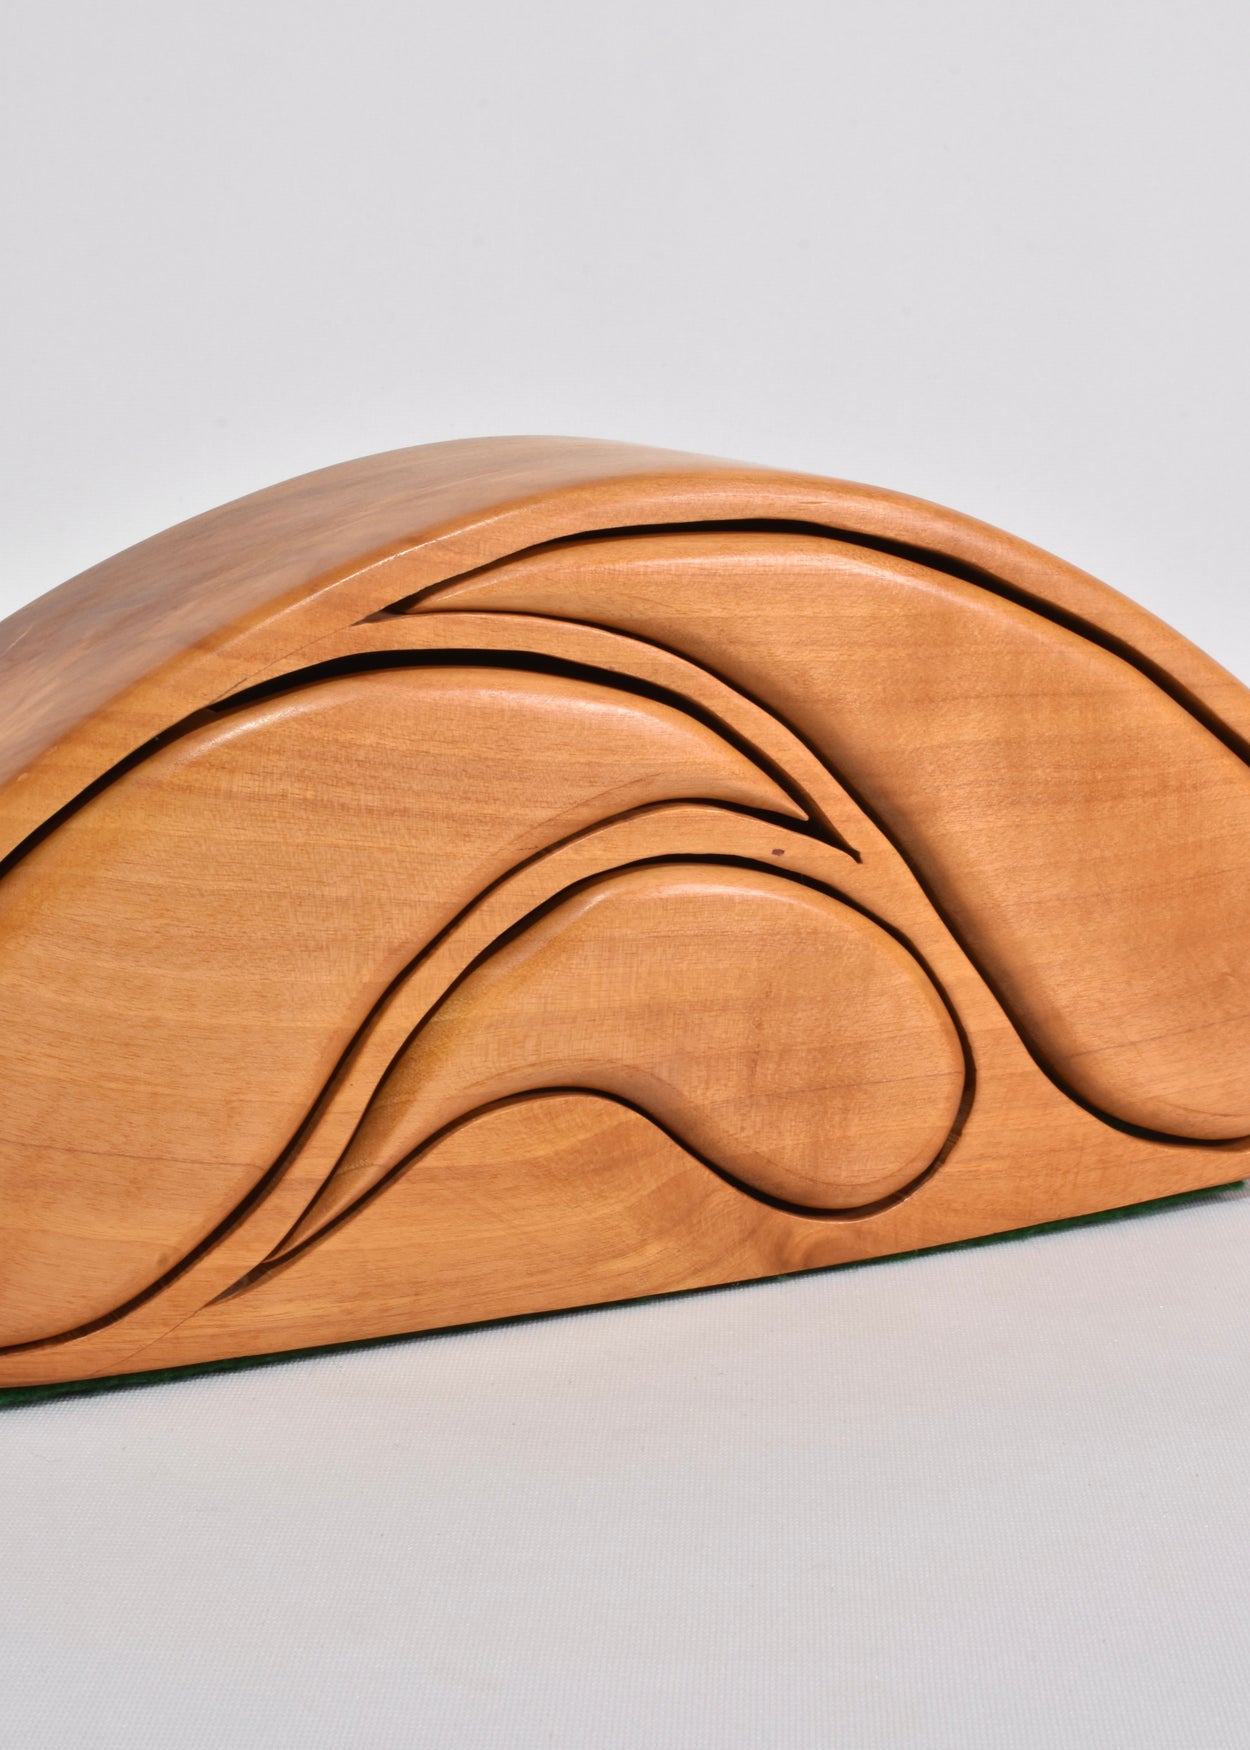 Curved Wooden Jewelry Box